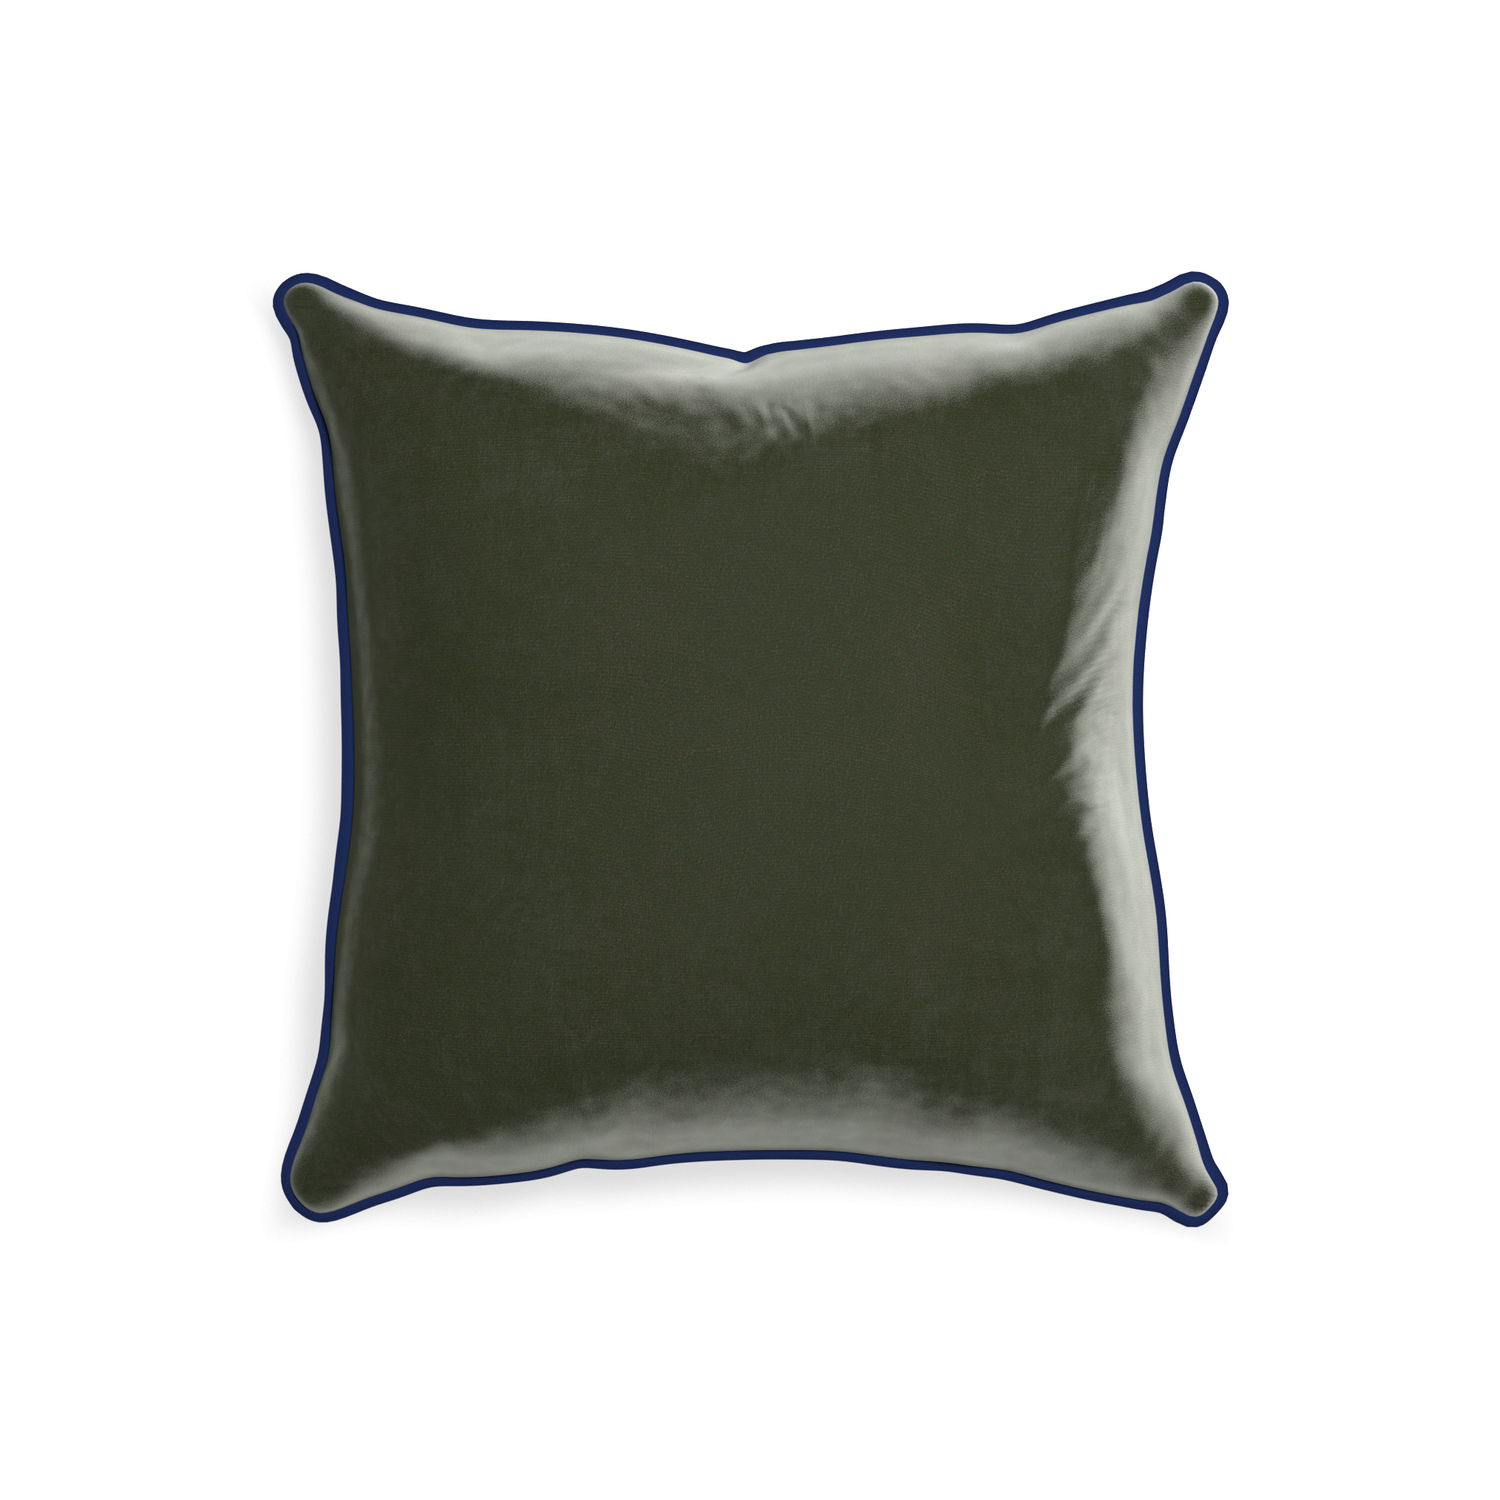 20-square fern velvet custom fern greenpillow with midnight piping on white background